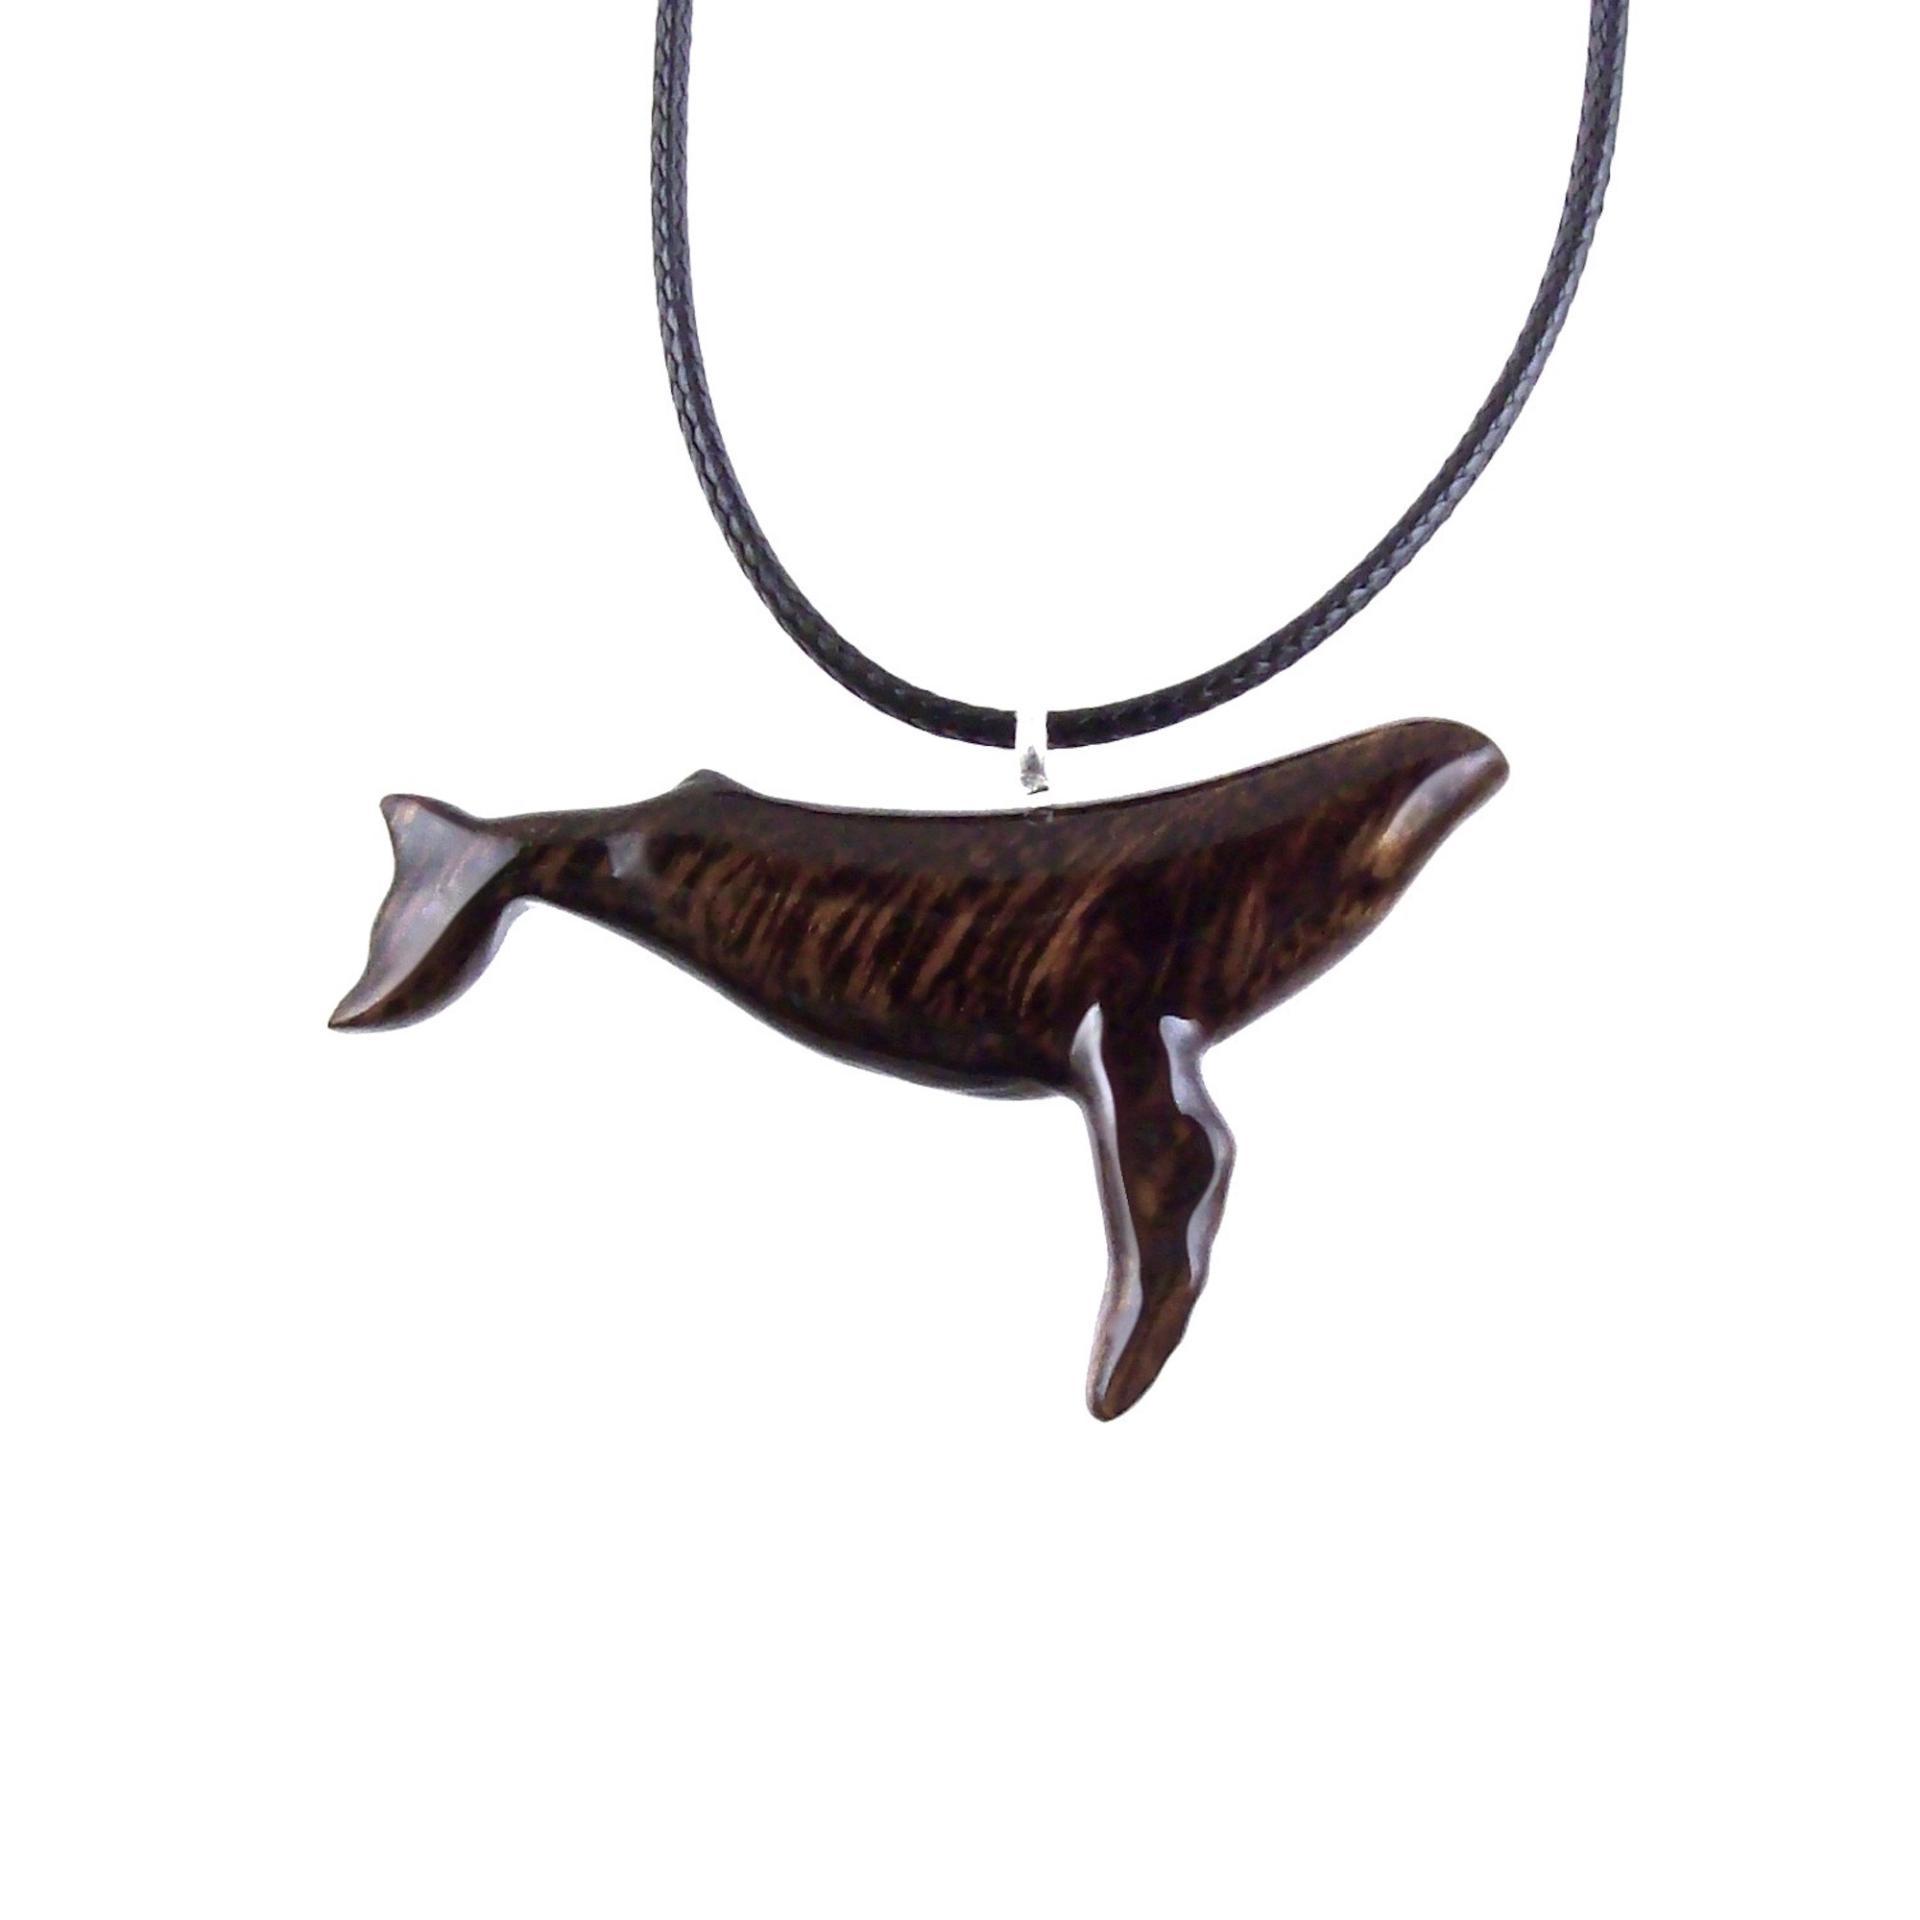 Humpback Whale Pendant, Hand Carved Wooden Sea Animal Necklace, Nautical Wood Jewelry, Whale-watcher Gift for Men Women